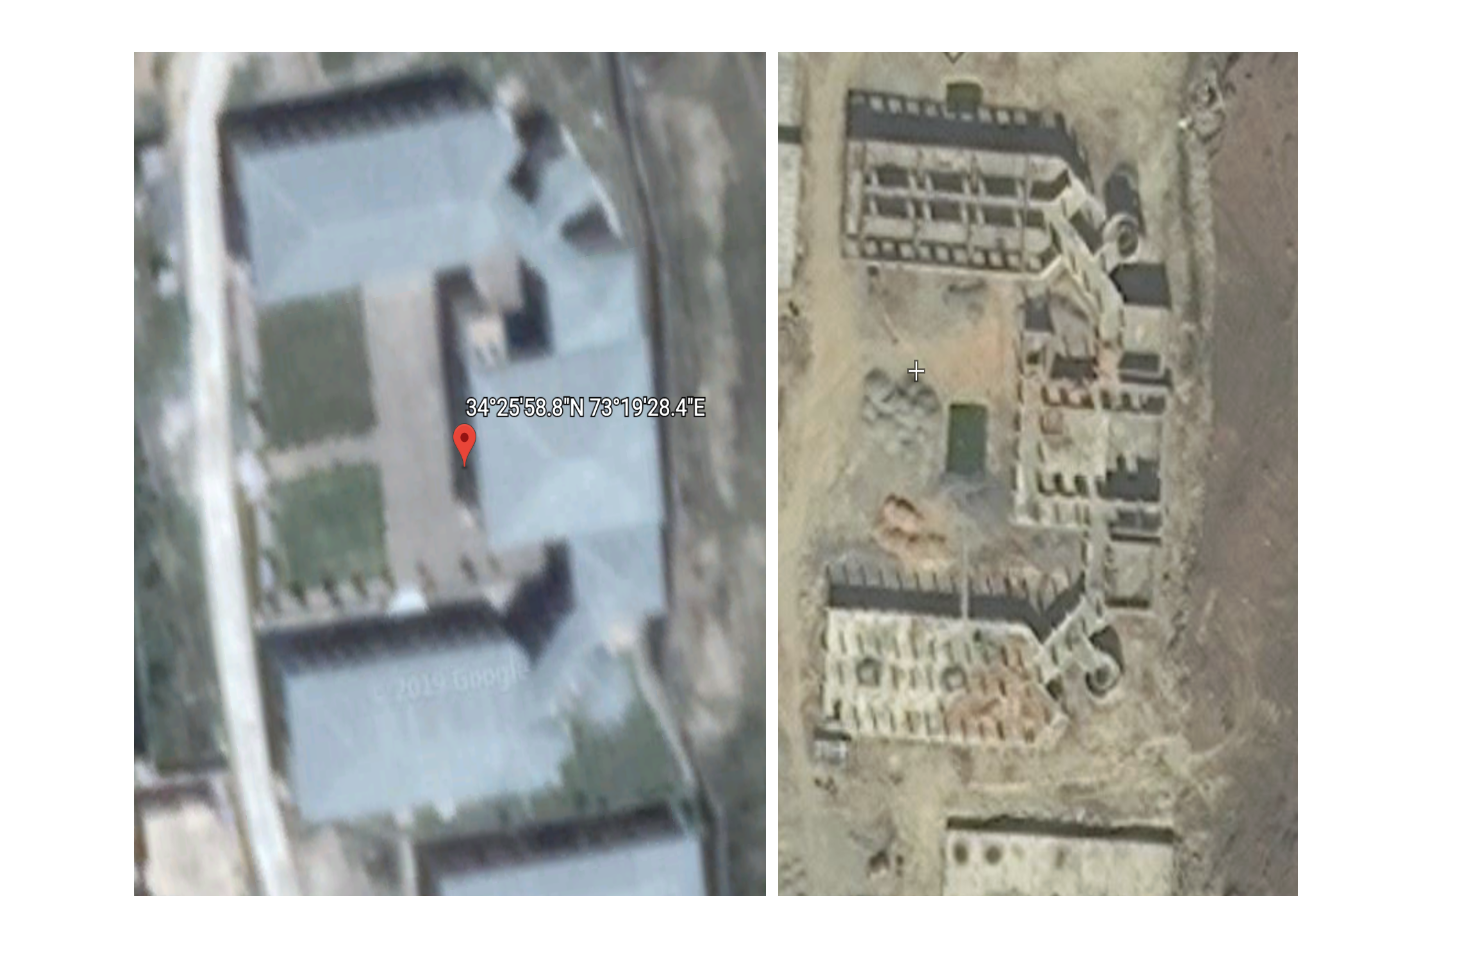                               Satellite Images of Google Earth (Before) VS Zoom (Daily) Show Clear Evidence of Destruction of Jaish-e-Mohammad Structures                             
                              